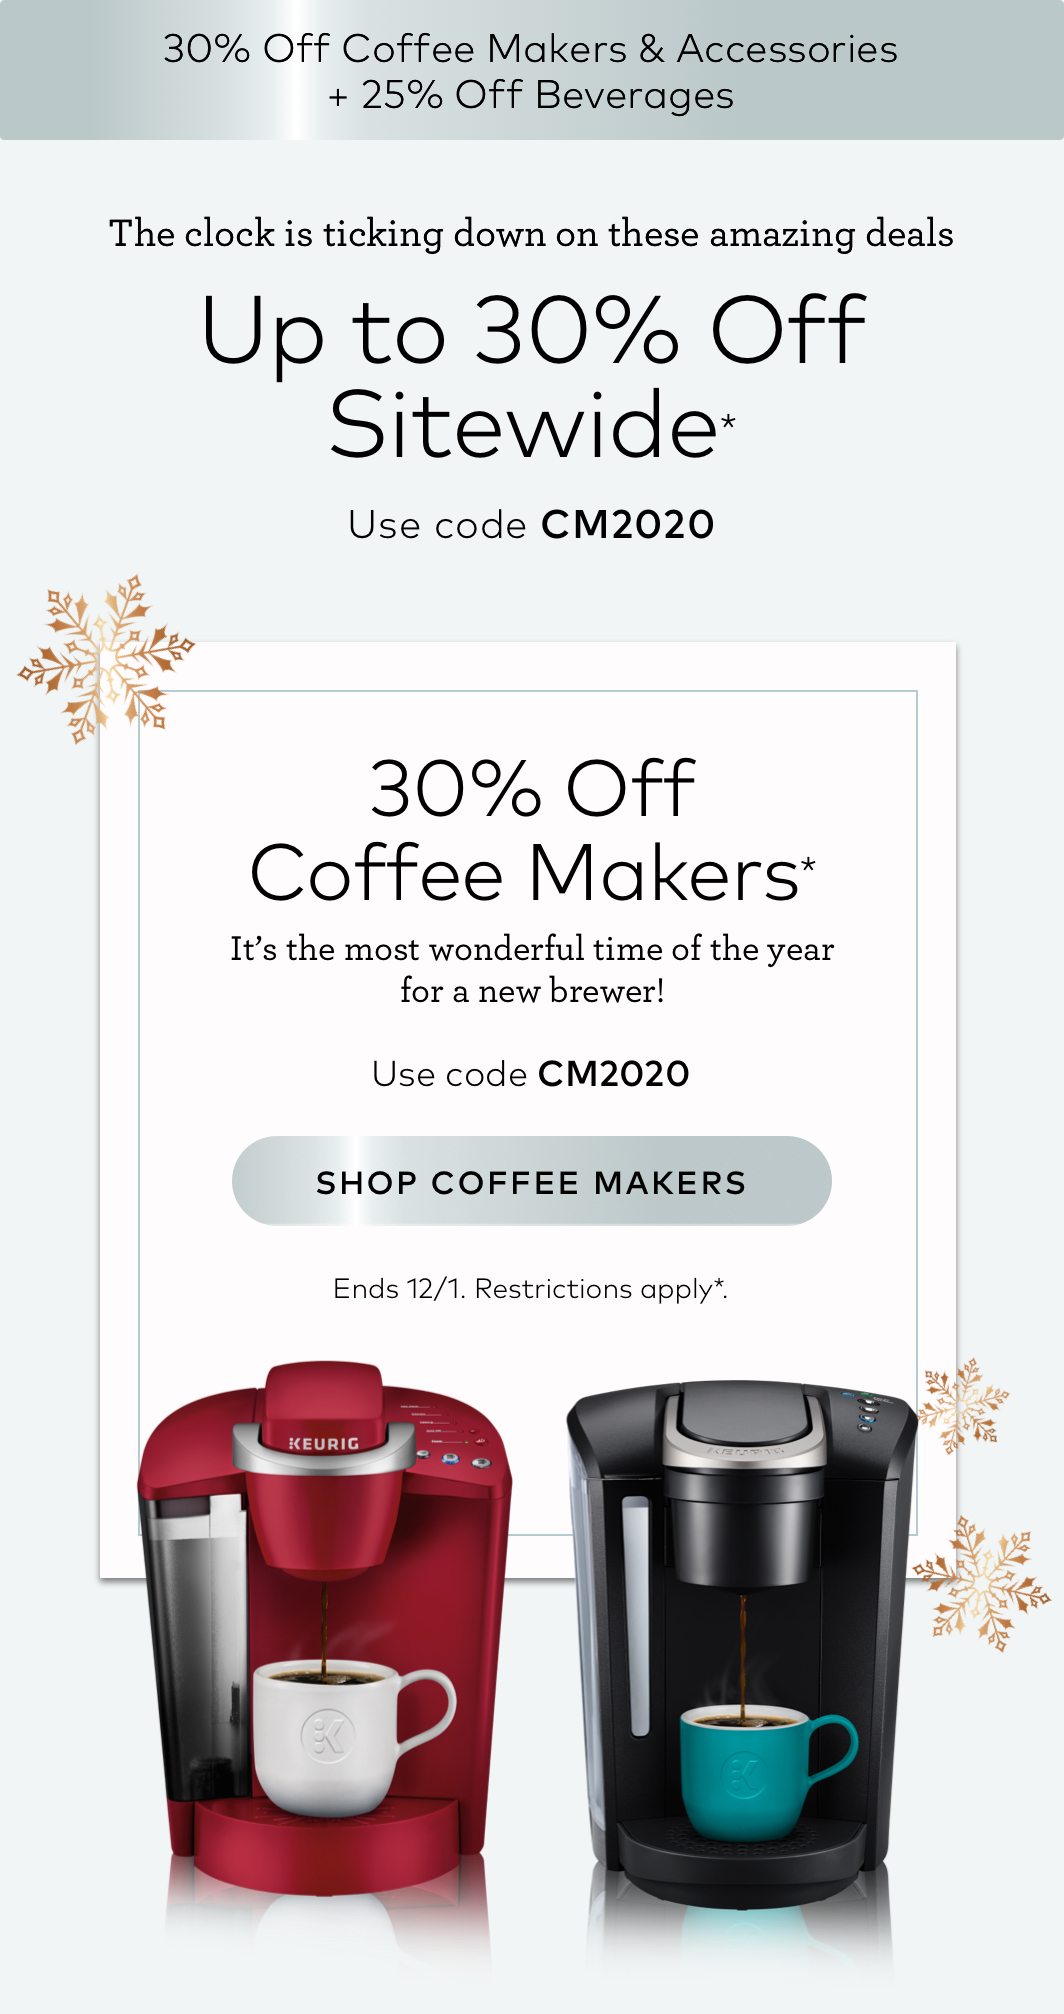 30% off Coffee Makers